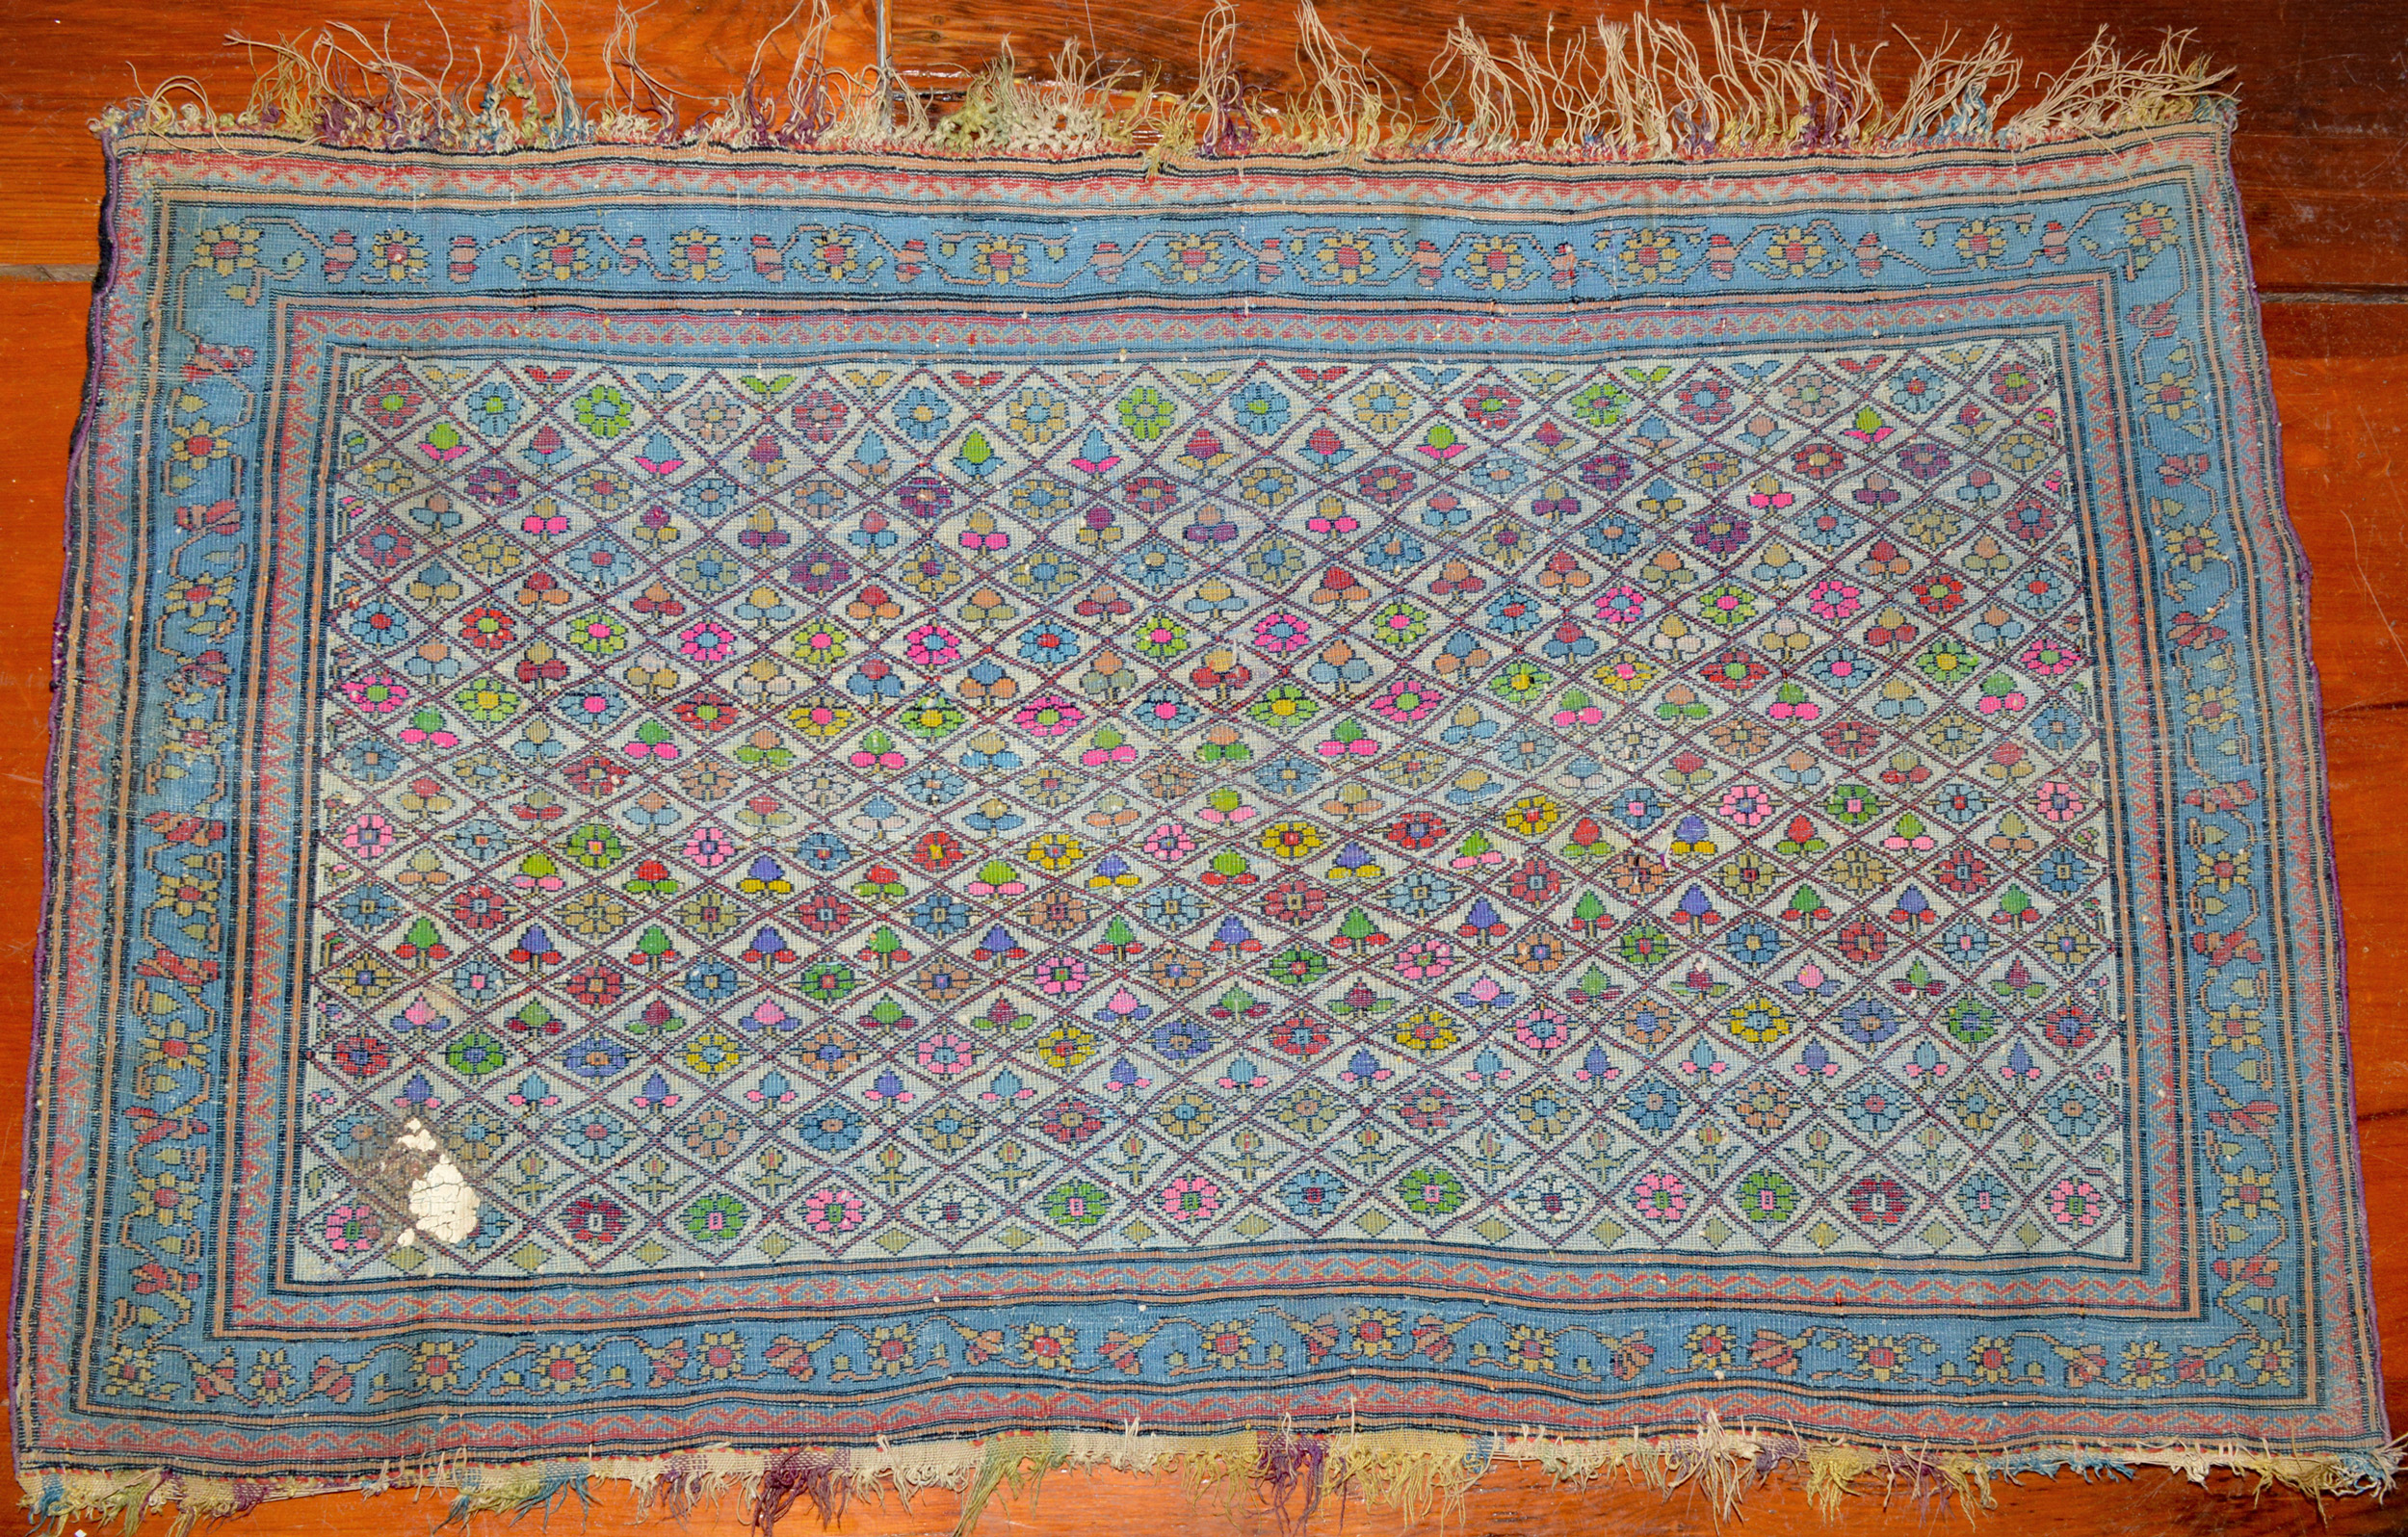 A view of the back of a small antique Mohtasham Kashan rug showing the weave and the wide use of synthetic dyes. Based on other factors, such as the design and pliable handle and light weight, this seems to be from the earlier period of Mohtasham Kashan production, circa 1880 to 1890. The wide use of synthetic dyes in the lattice and flower design field is an interesting aspect from an art history perspective. Douglas Stock Gallery is a nationally regarded dealer in antique Persian rugs and other types of antique Oriental rugs. Based in the Boston,MA area in historic South Natick,MA, 5 minutes from Wellesley center, our shop is open Monday to Saturday by appointment or chance. Helen and Douglas Stock of Douglas Stock Gallery work with individual clients, architects and interior designers across the United States who are interested in top quality 19th century Oriental rugs and room size antique carpets.